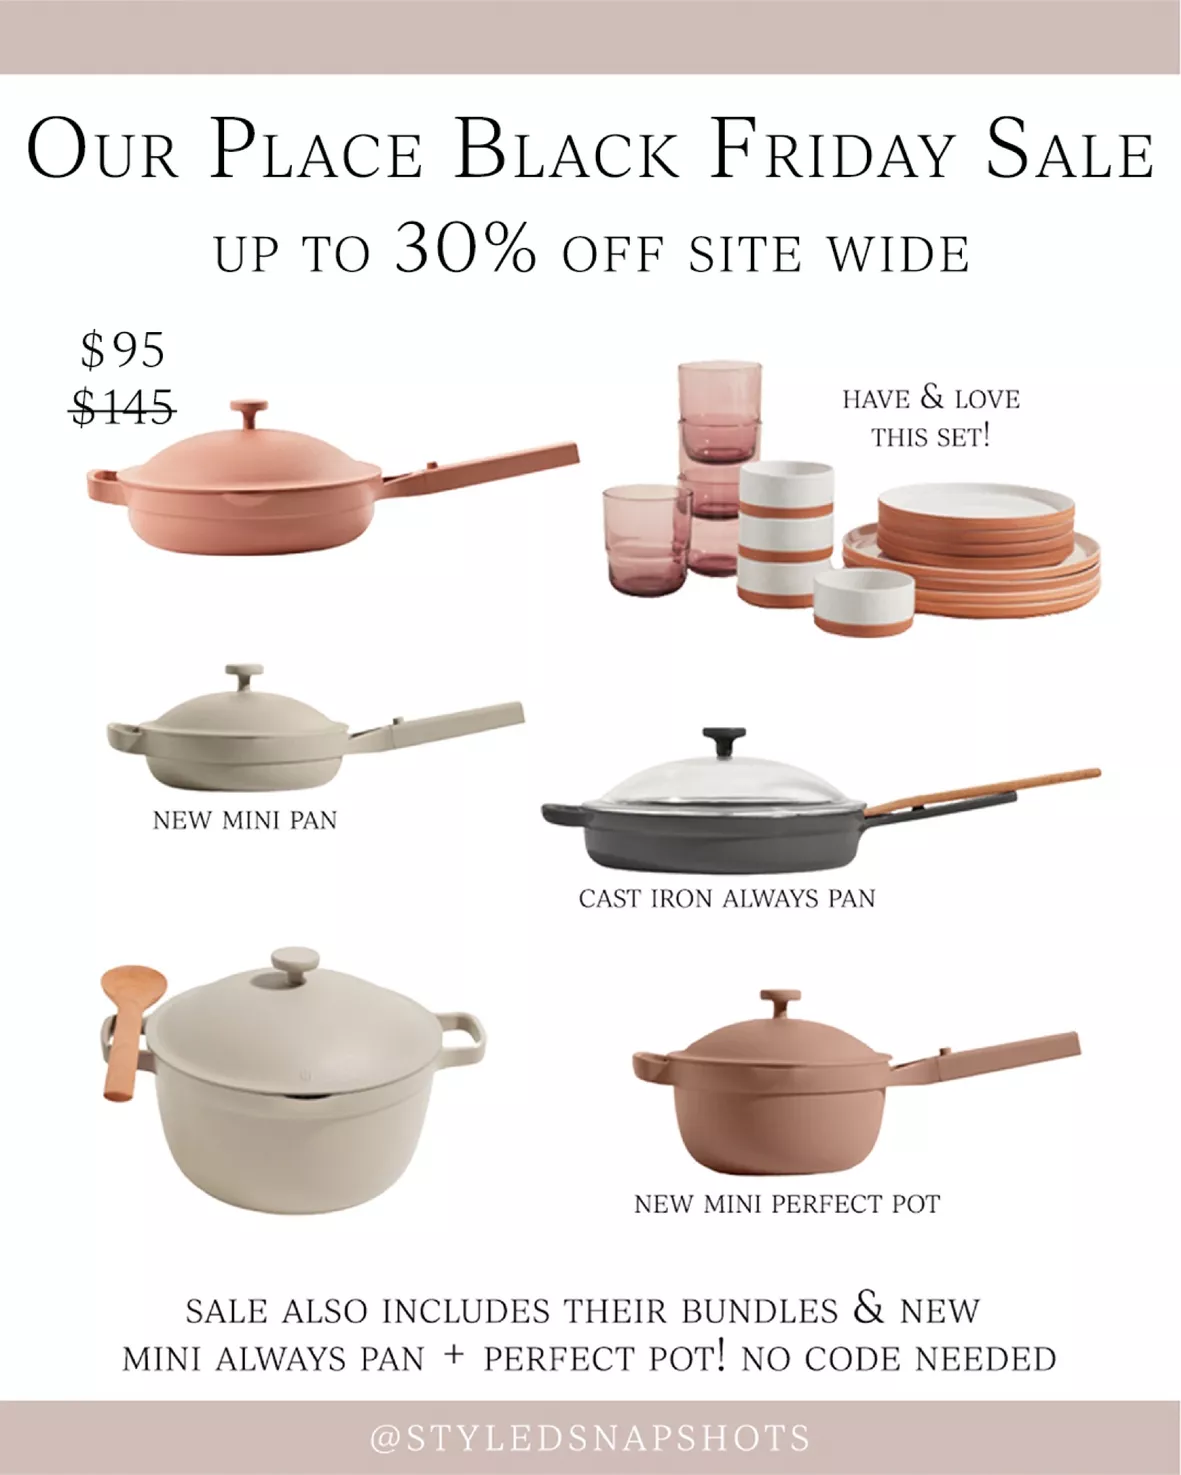 Non-Toxic Cookware - Styled Snapshots